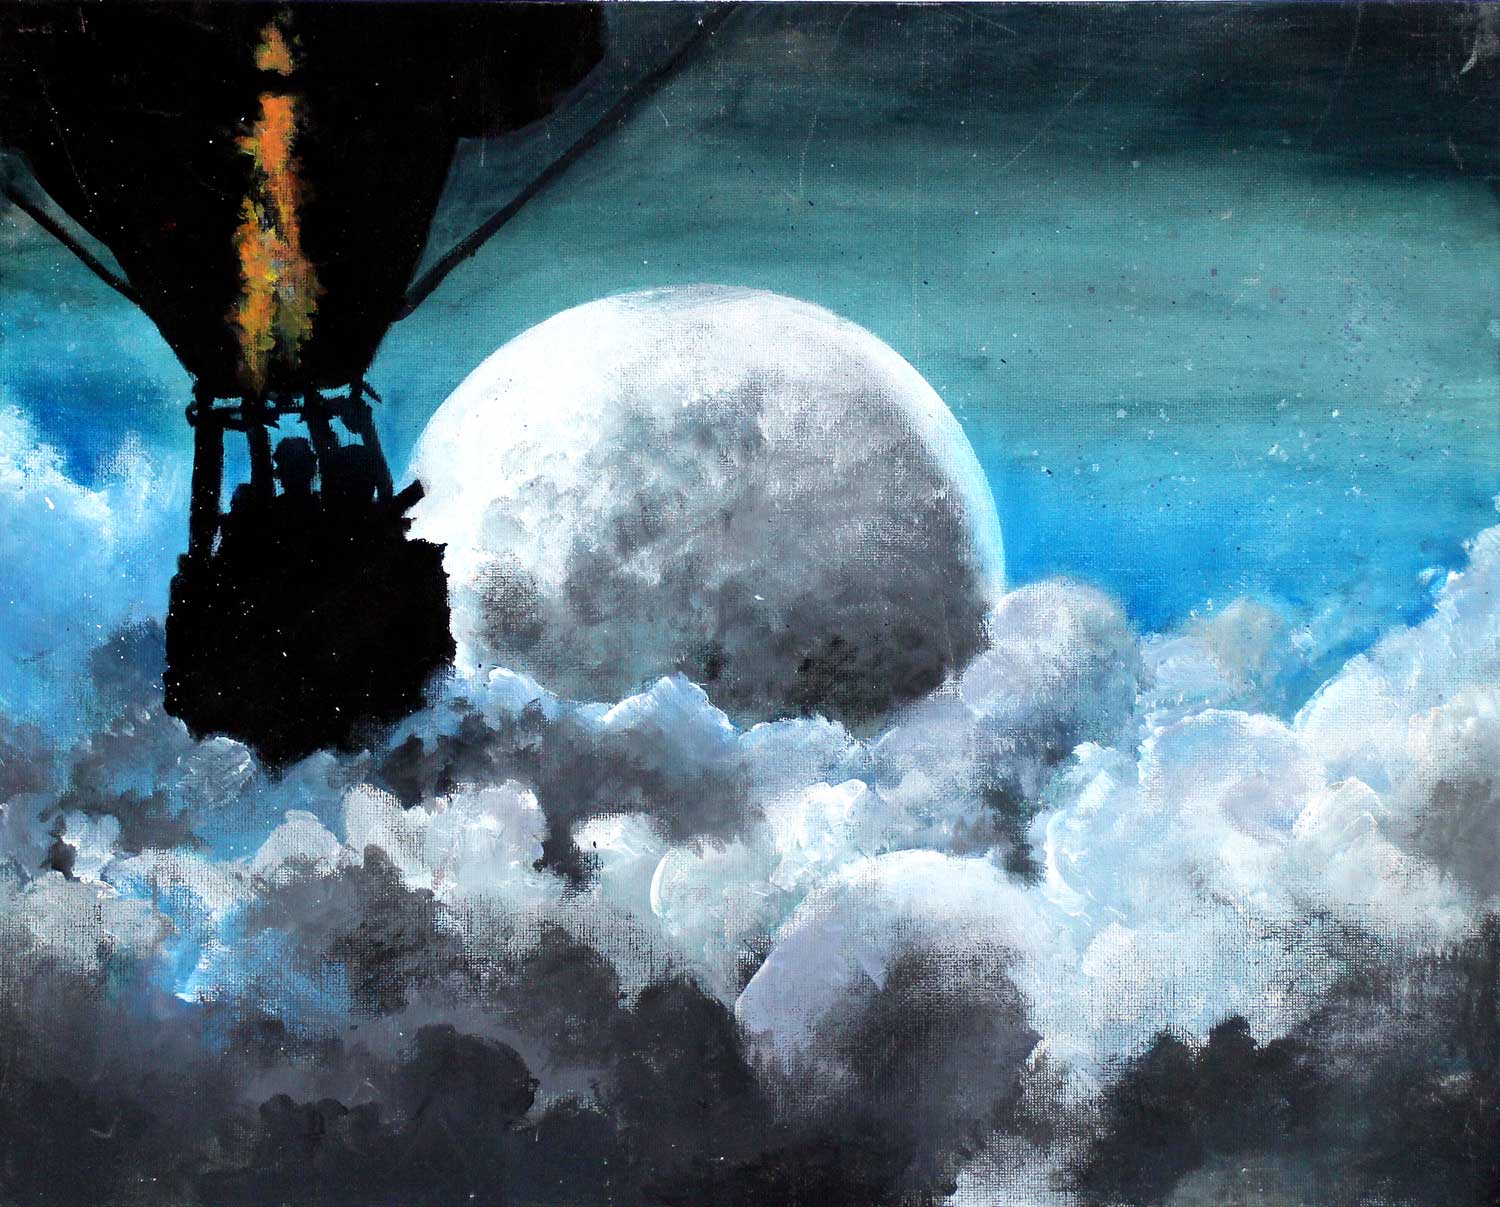 Student artwork of hot air balloon and full moon